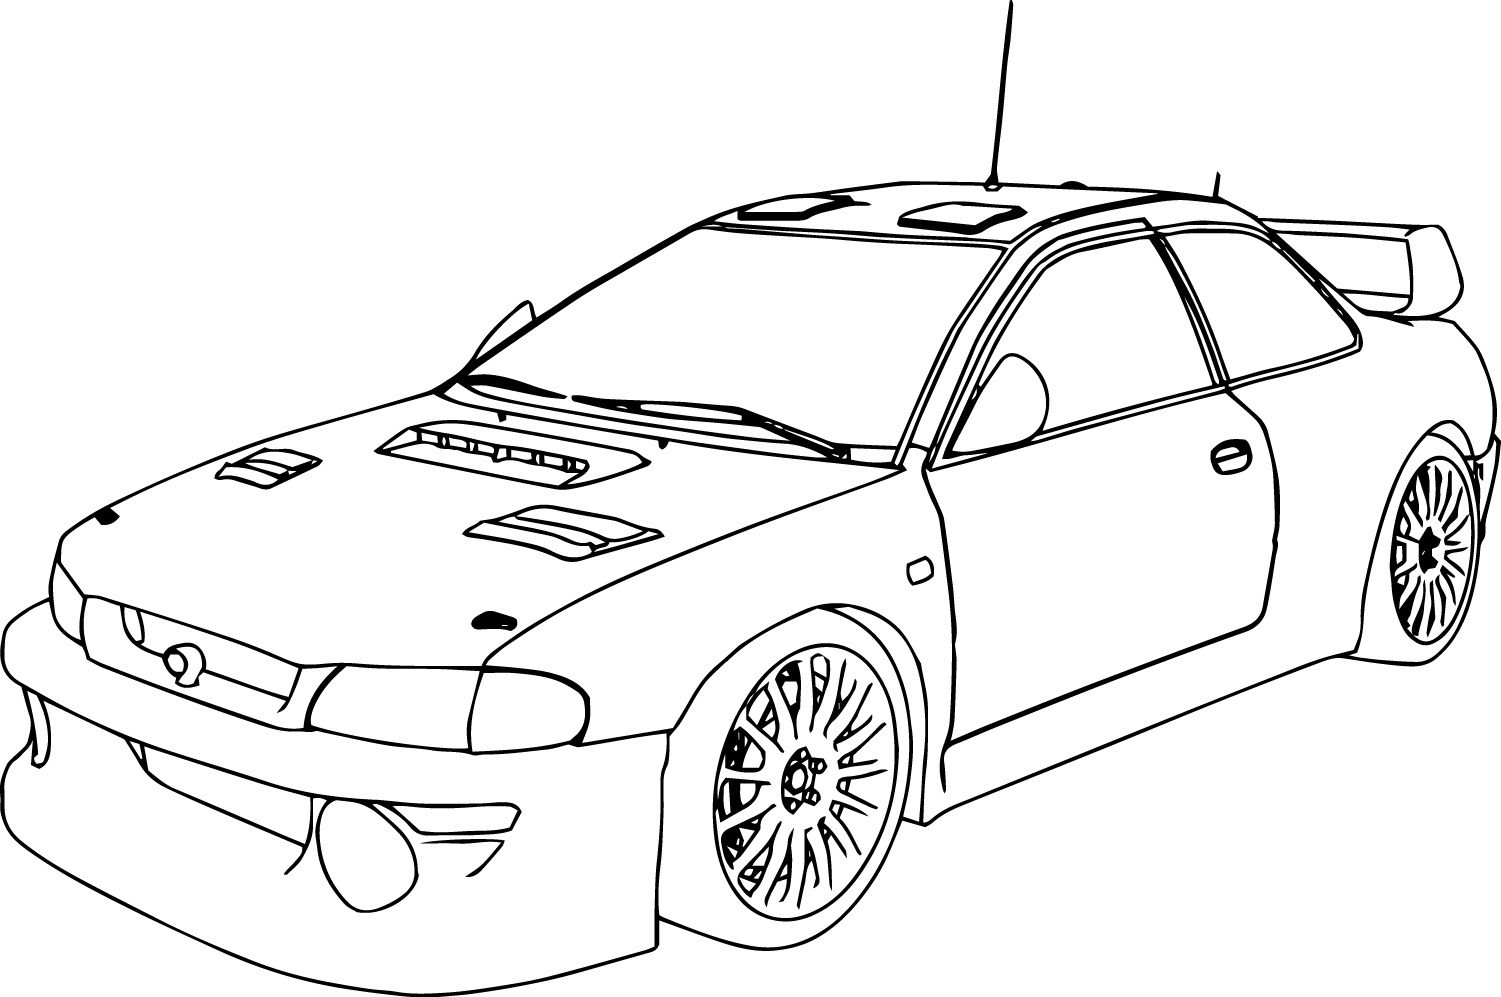 Car Coloring Pages For Adults At Getcolorings.com 9C6